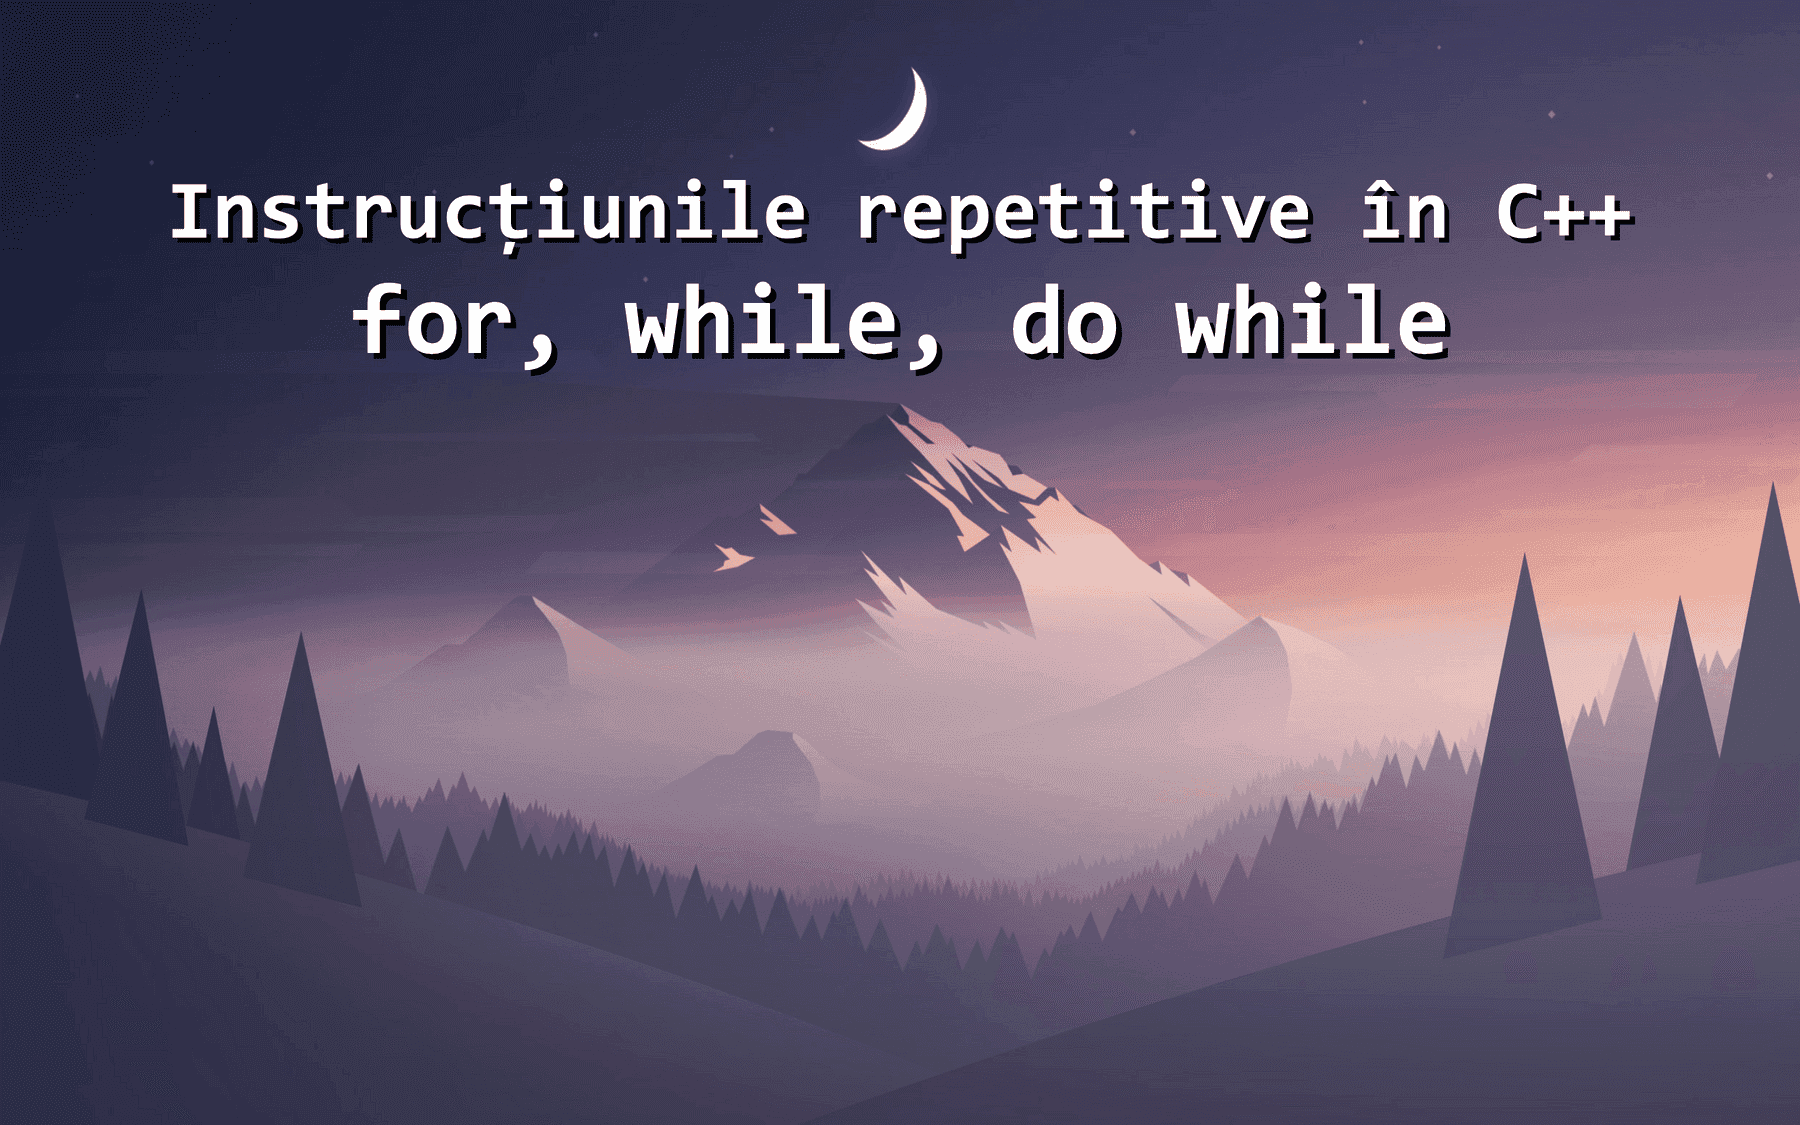 Instrucțiunile repetitive în C++: for, while, do while